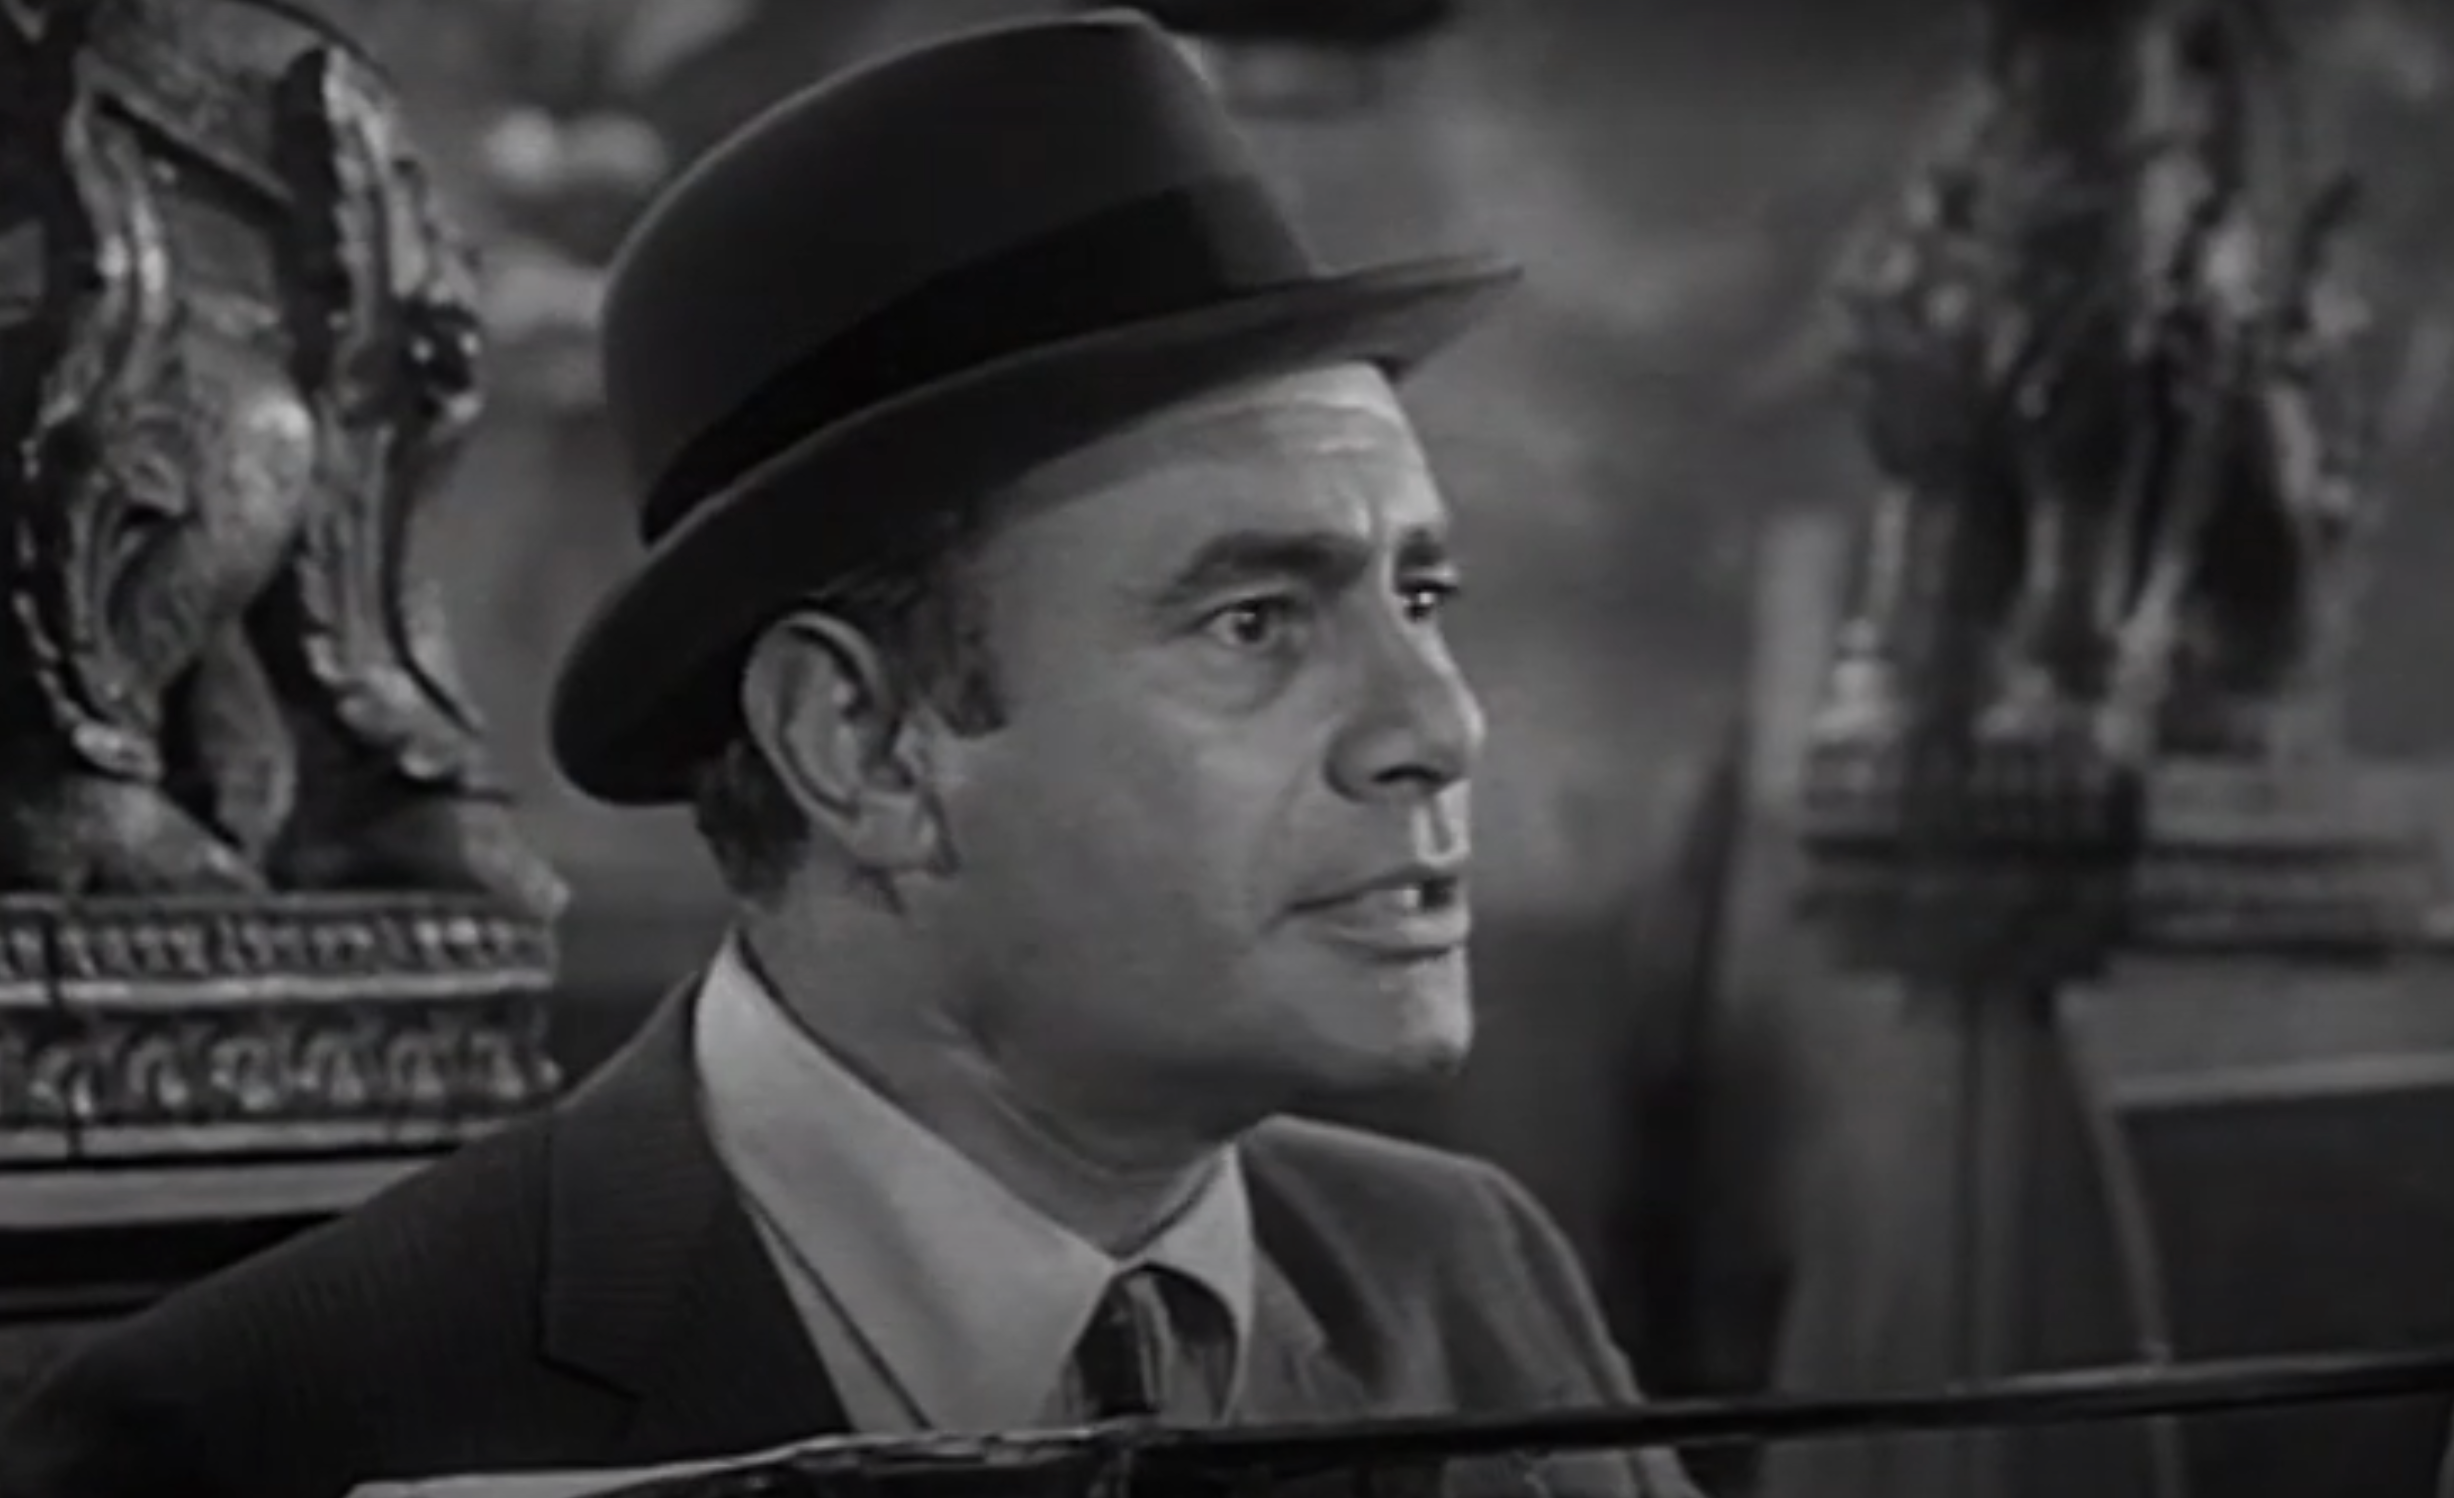 Man in a fedora and suit, looking to the side, with a concerned expression in a black-and-white film scene